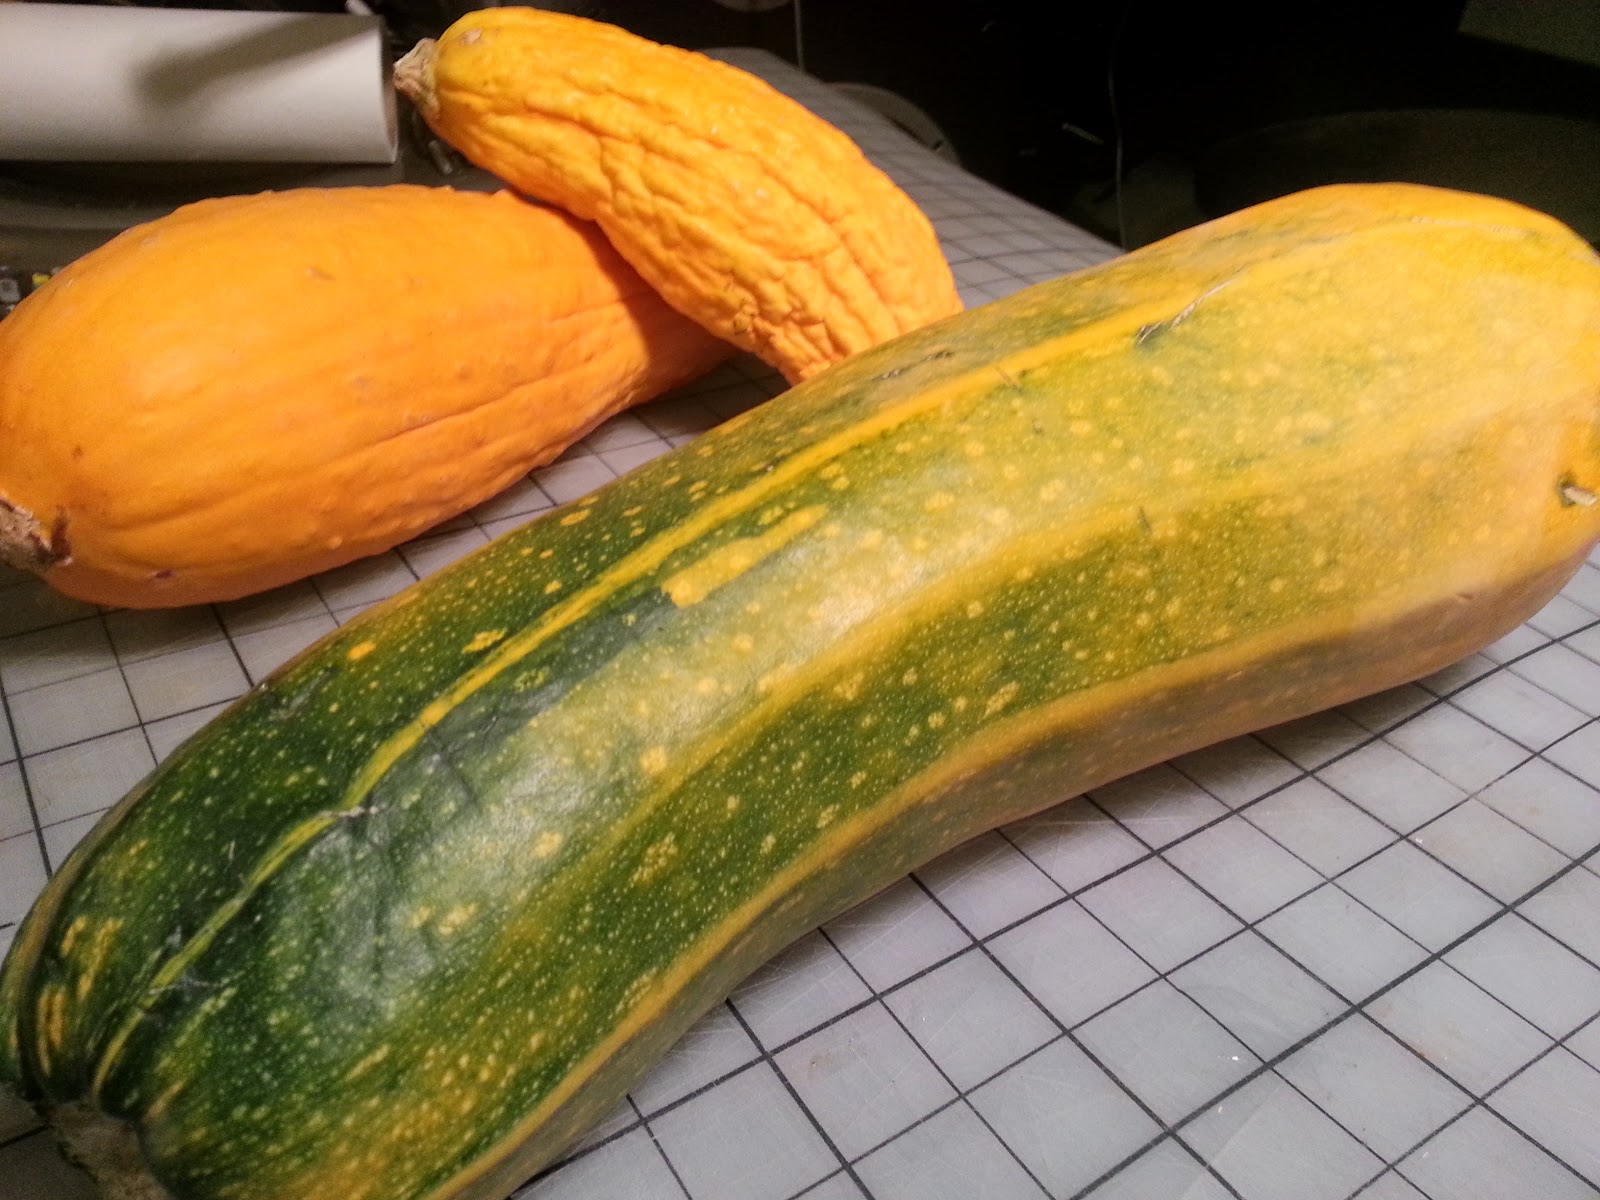 HelluvaCook.com!: DYK?!? Zucchini Turns Yellow, Given Enough Time!